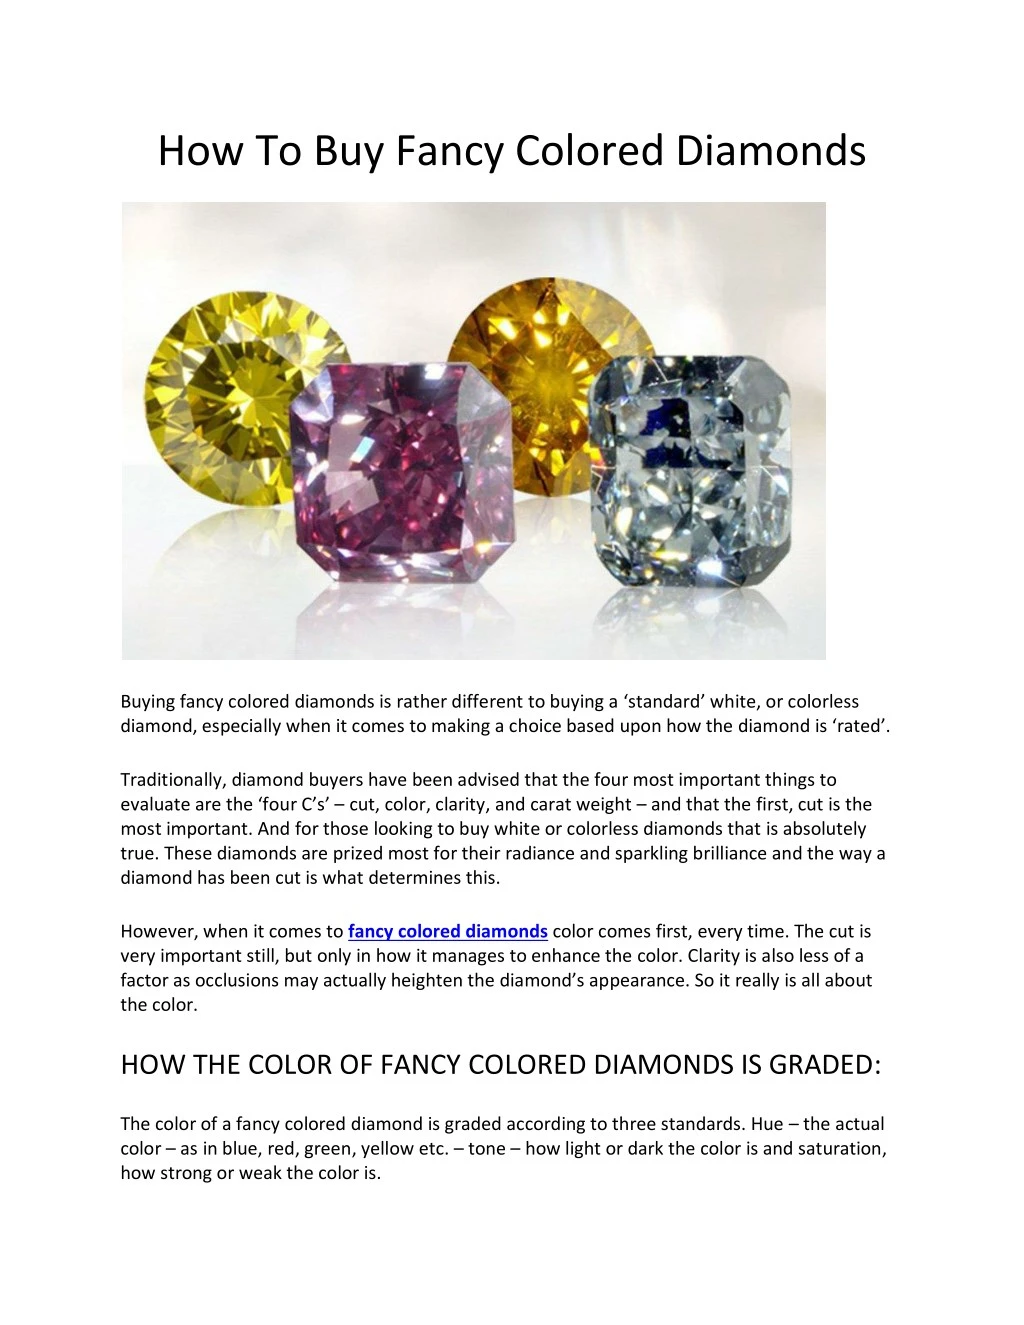 how to buy fancy colored diamonds